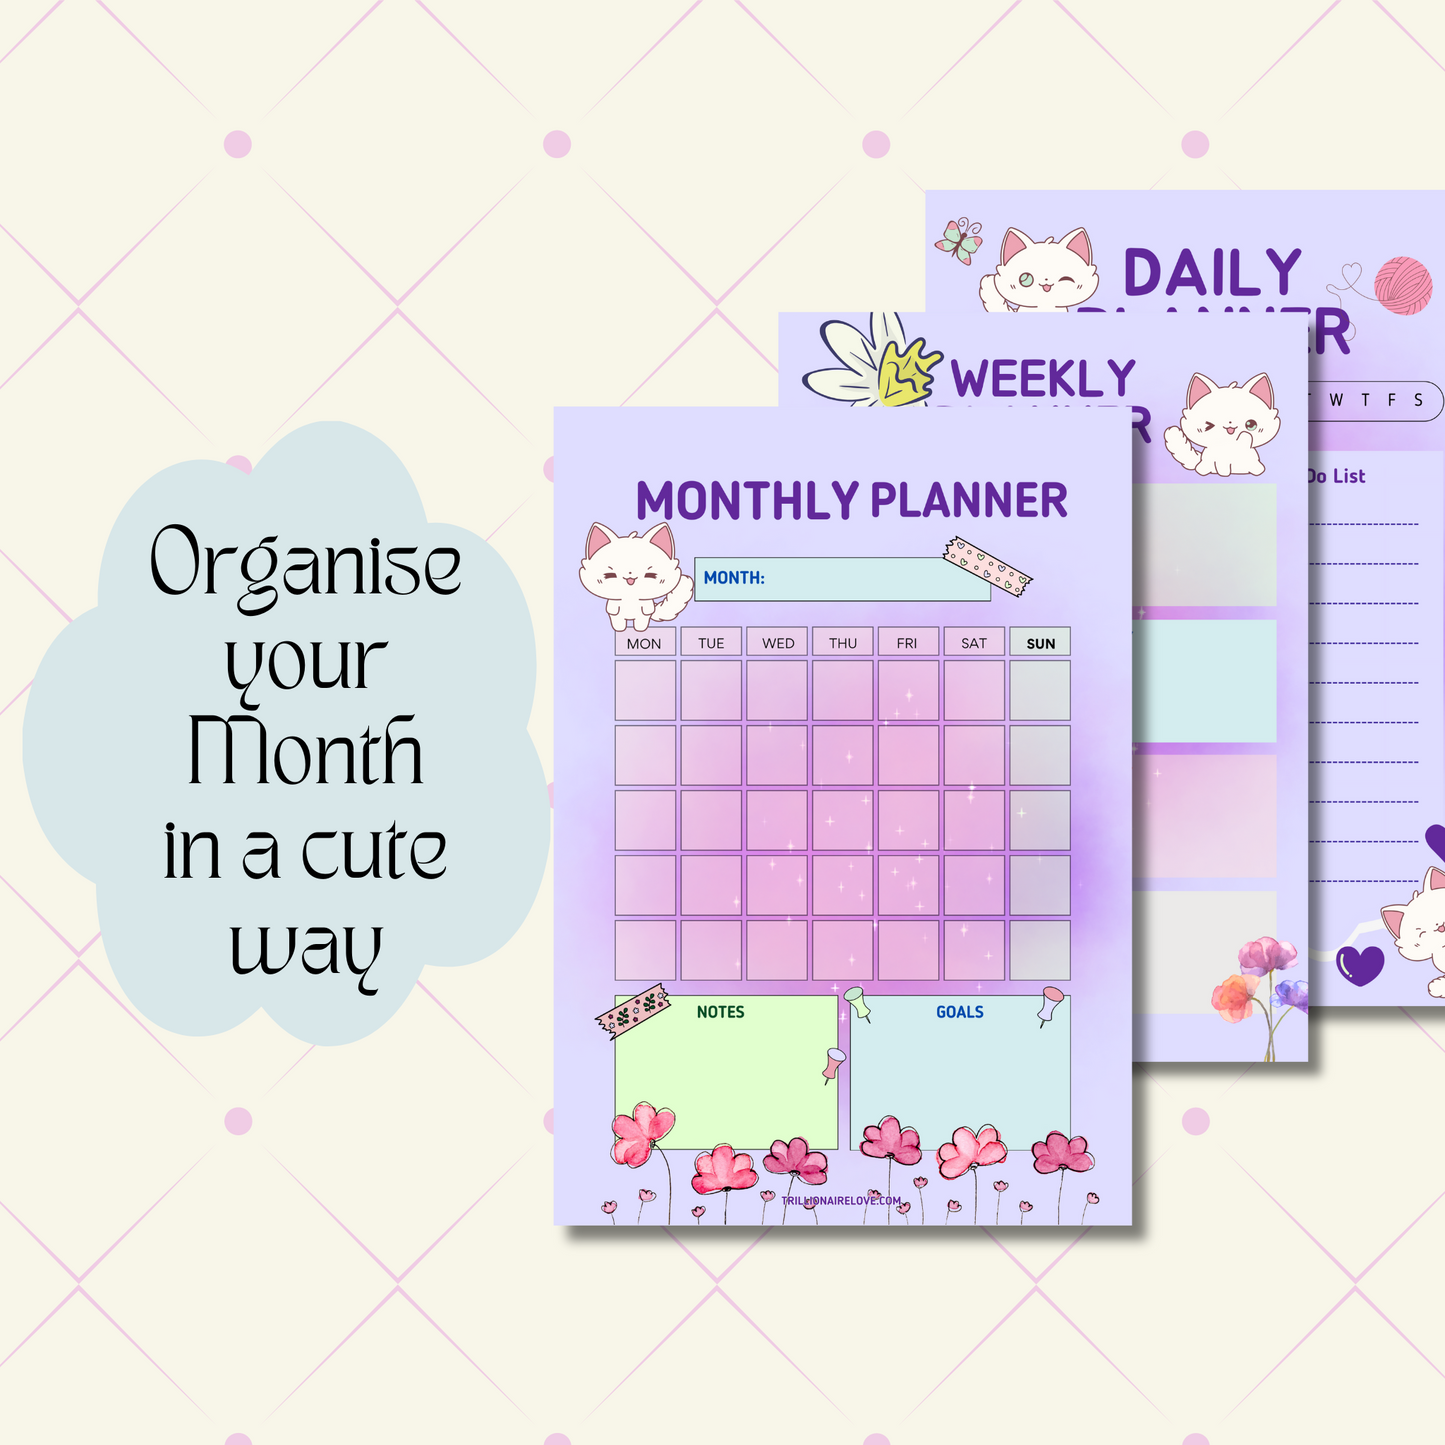 Cute cat Daily Planner Printable, Weekly Planner, Monthly Planner, A4 & A5